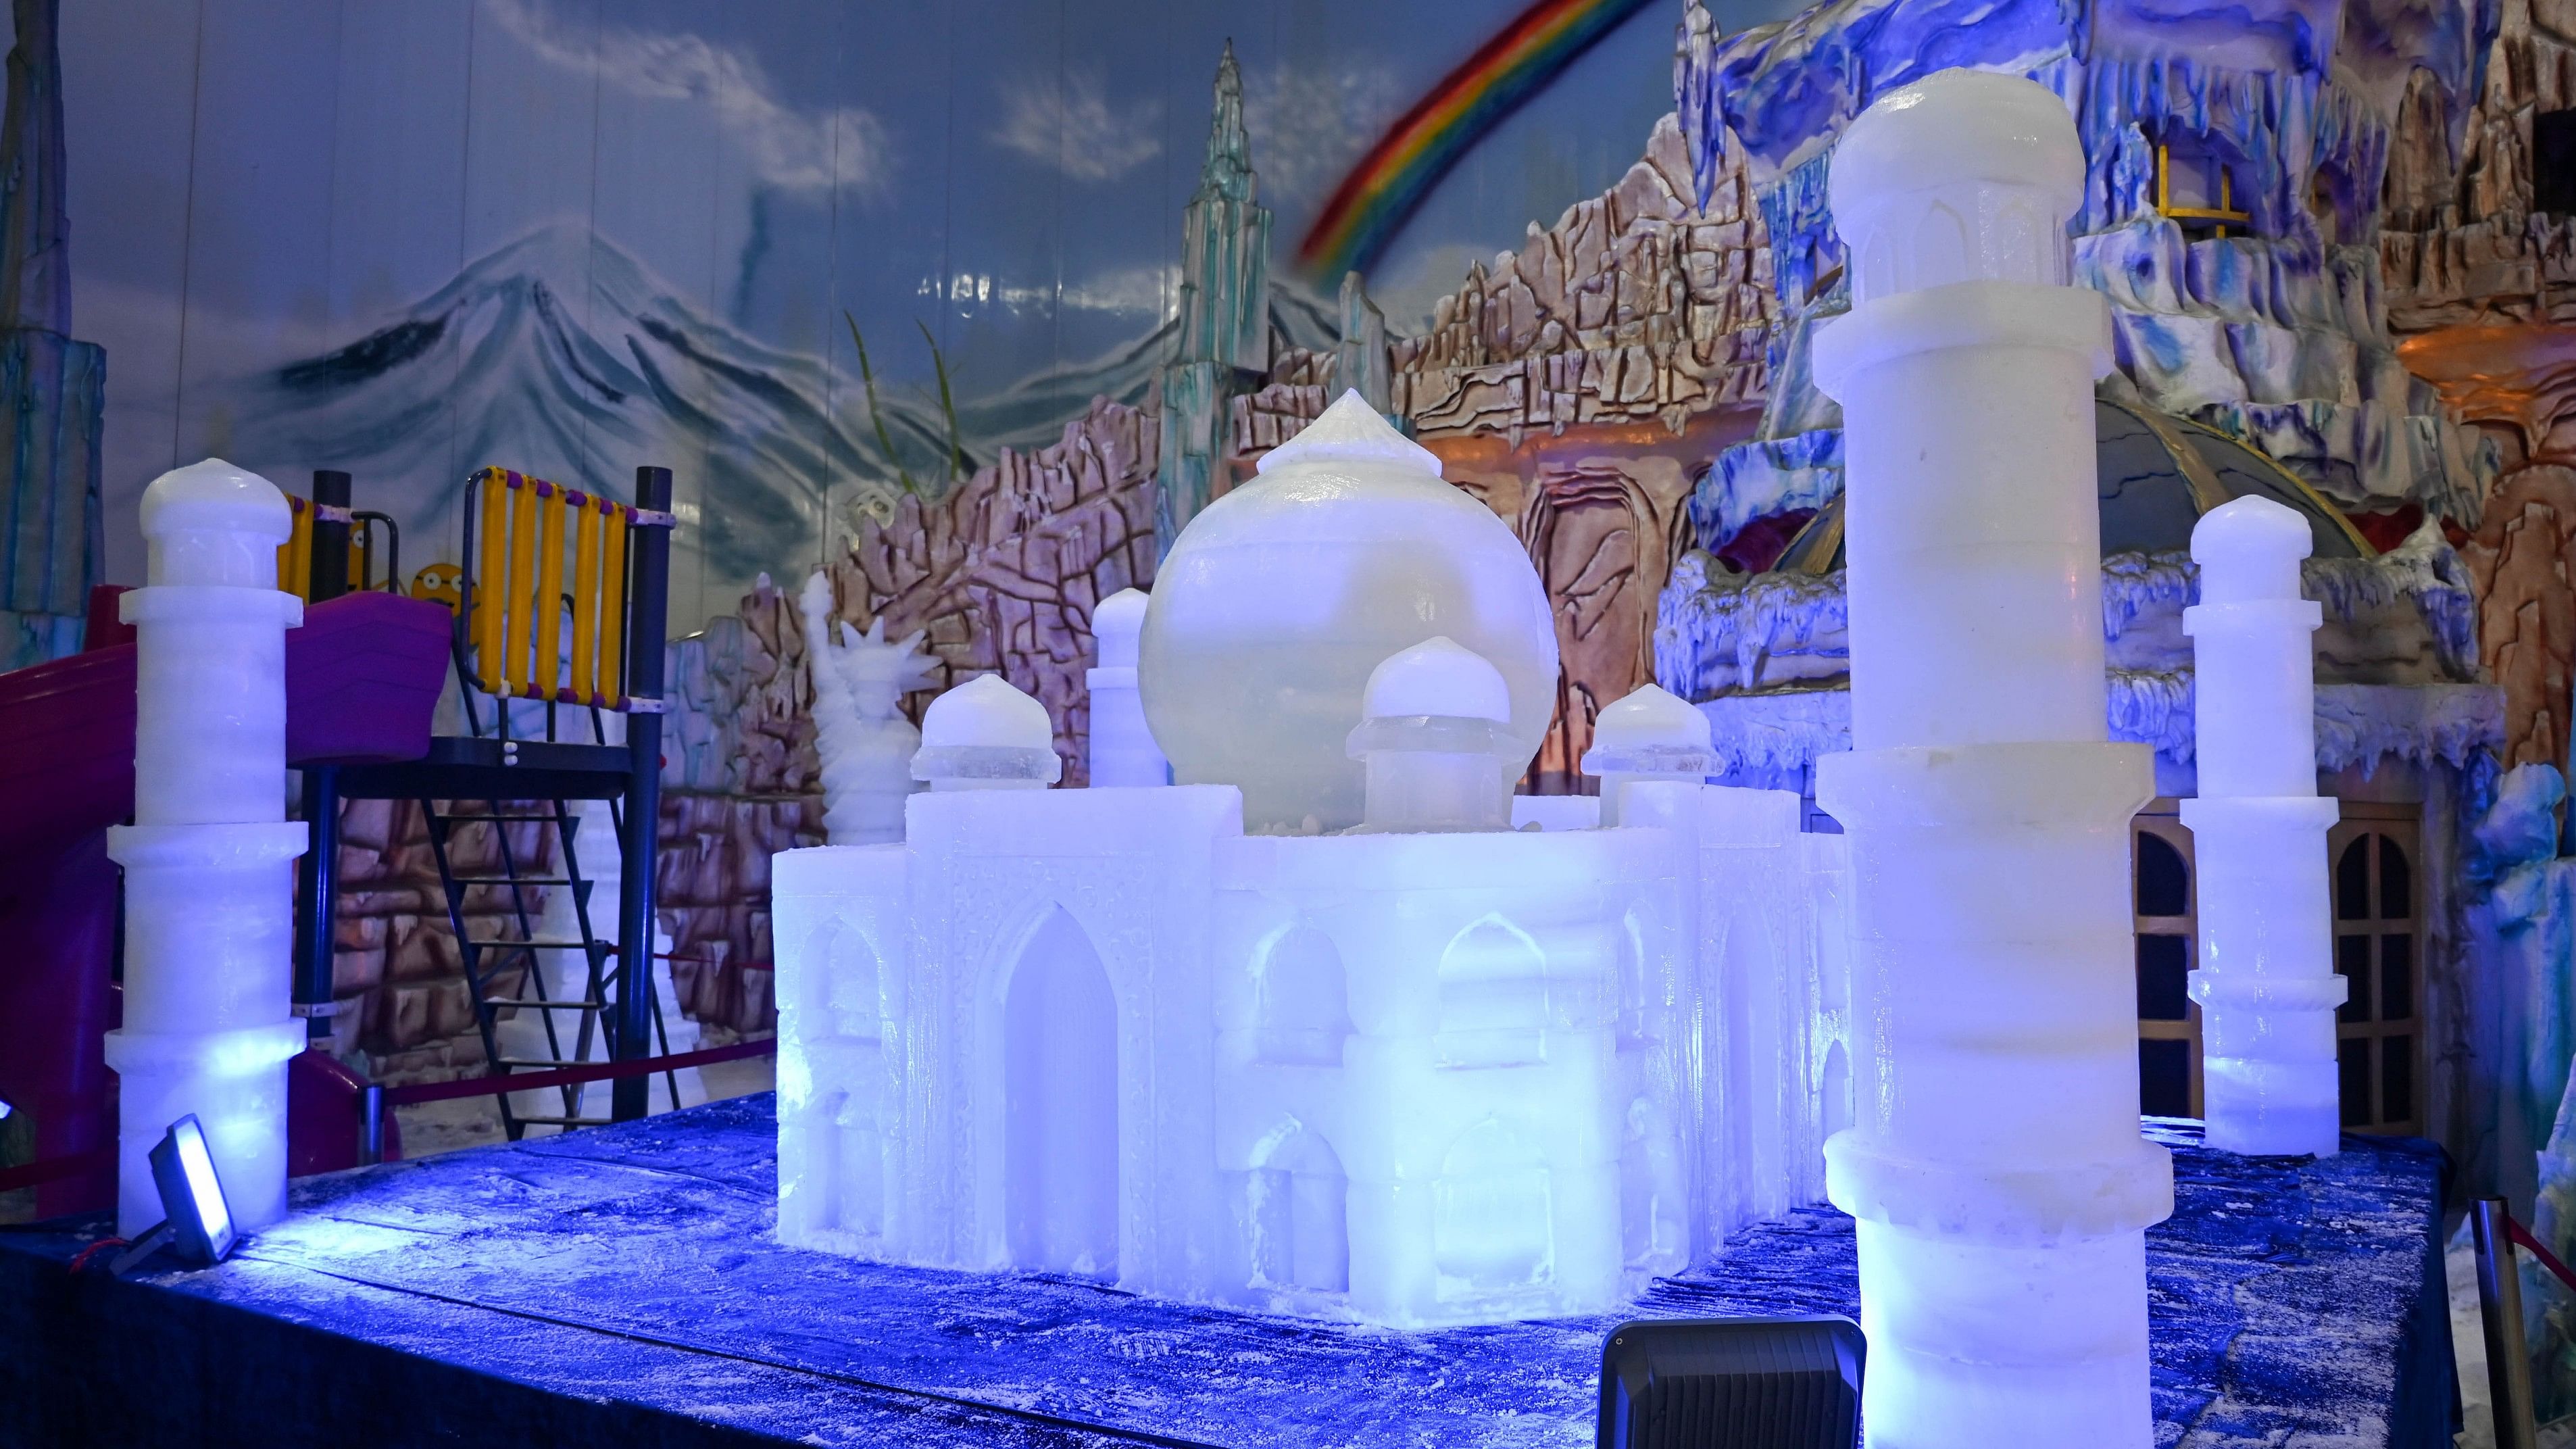 The ice sculpting festival at Snow City, Jayamahal Main Road, features five of the world's seven wonders, including the Taj Mahal. DH PHOTO/BH Shivakumar